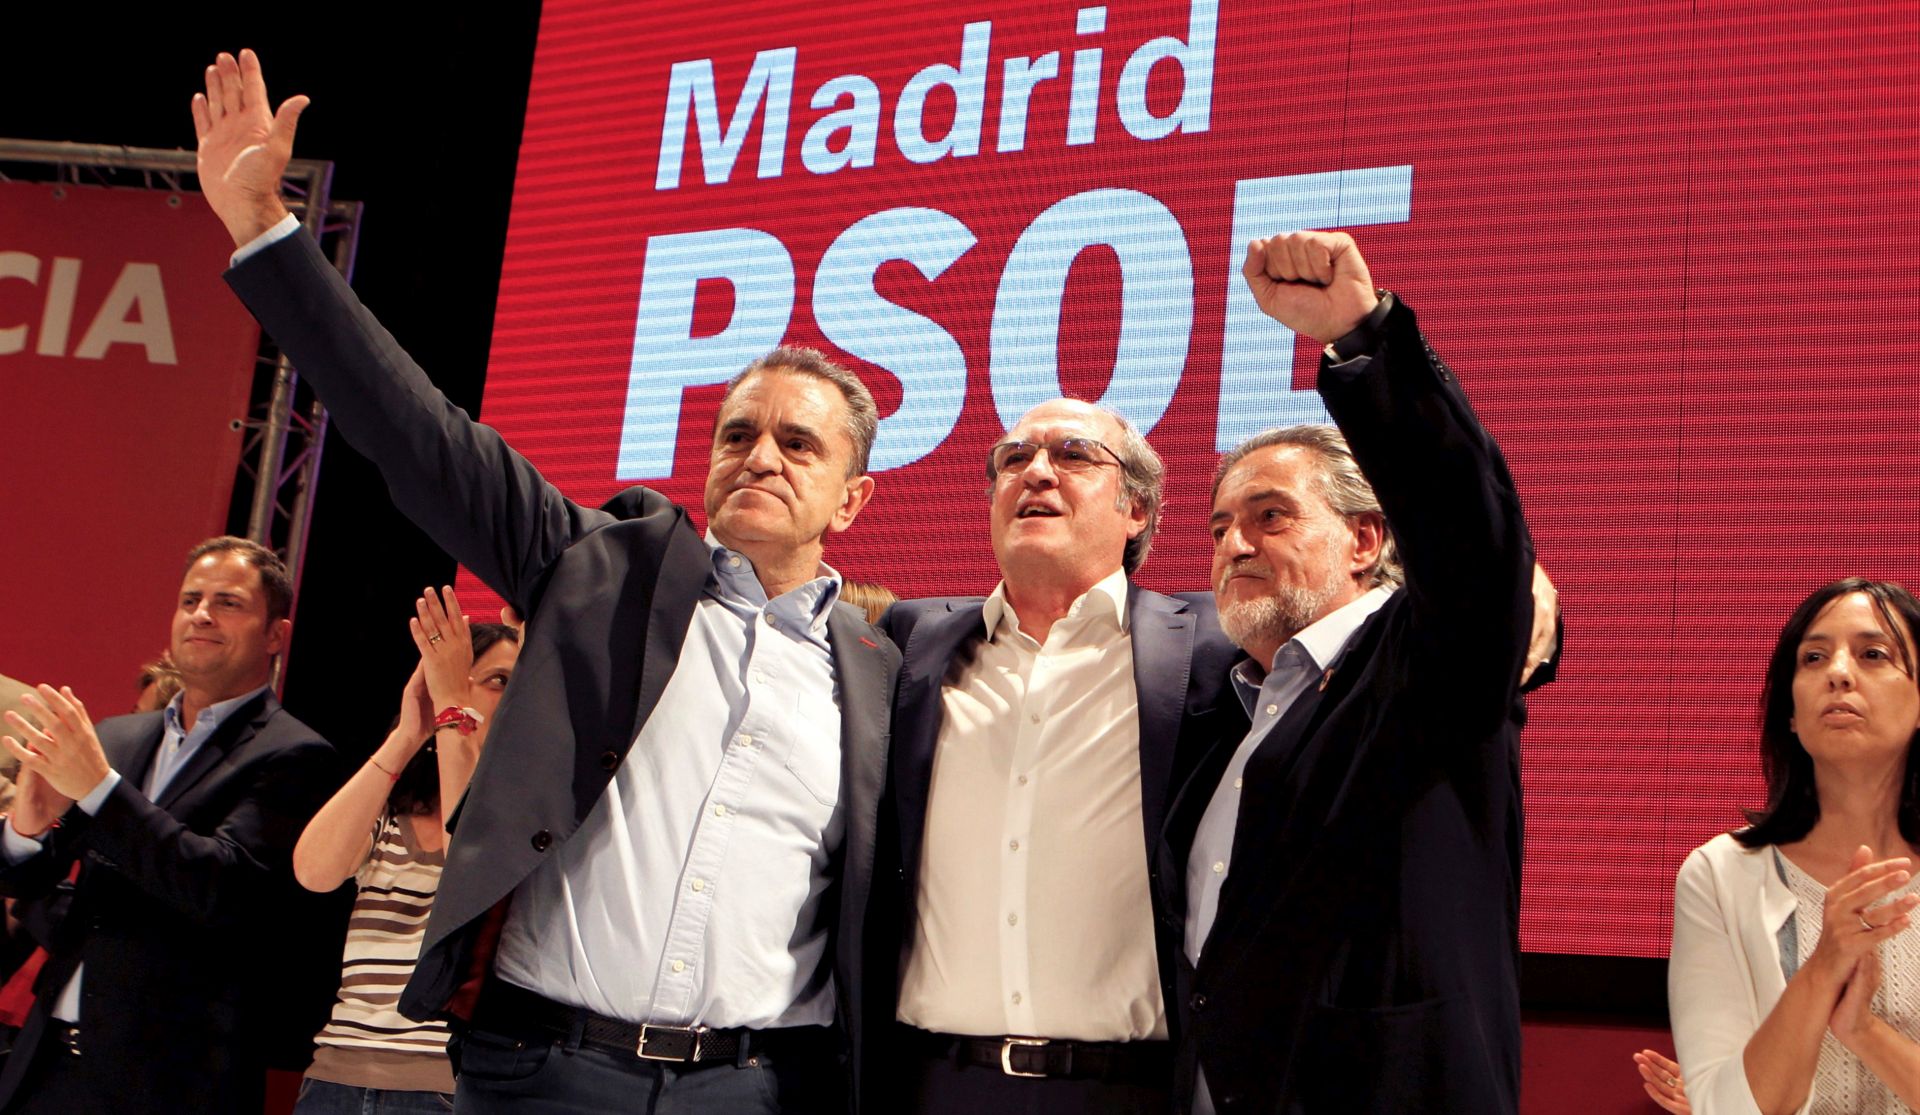 epa07604858 Spanish Socialist Party's candidate for Madrid Regional President Angel Gabilondo (C) candidate for Madrid Mayor Pepo Hernandez (C-R) and party's regional Secretary General Jose Manuel Franco (C-L) wave to their supporters during a press conference in Madrid, Spain, late 26 May 2019. Gabilondo won the election in Madrid but did not gather enough votes to form a majority. Spain was holding local, regional and European Parliament elections at the same time. The European Parliament election was held by member countries of the European Union (EU) from 23 to 26 May 2019.  EPA/PAOLO AGUILAR